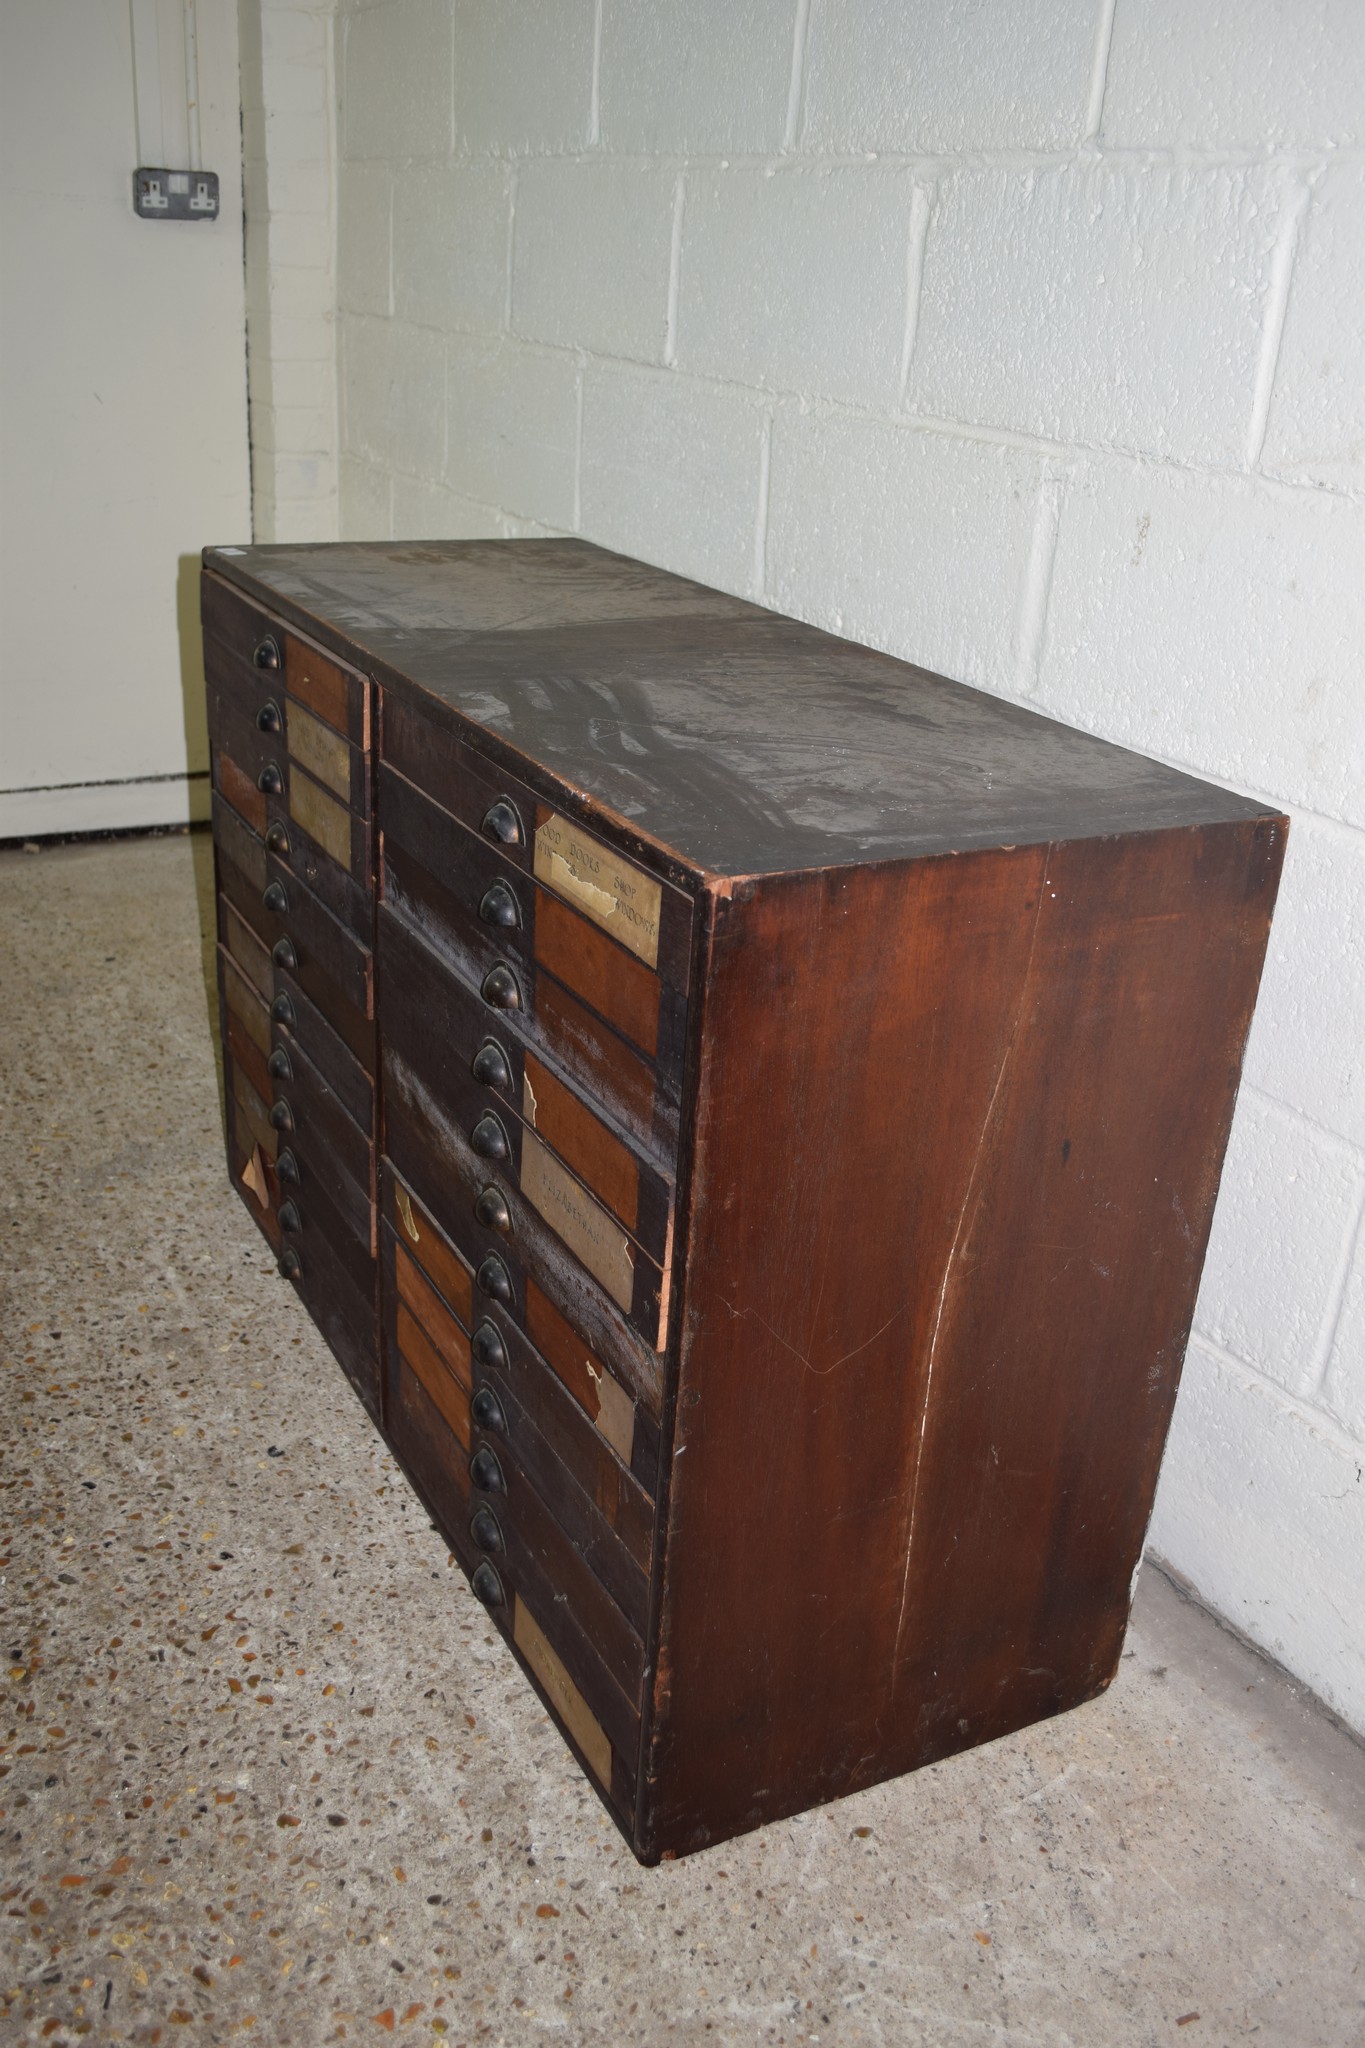 VINTAGE PINE STORAGE CHEST, POSSIBLY EX-RETAIL, CONTAINING 24 SHALLOW DRAWERS, APPROX 113 X 44CM - Image 4 of 4